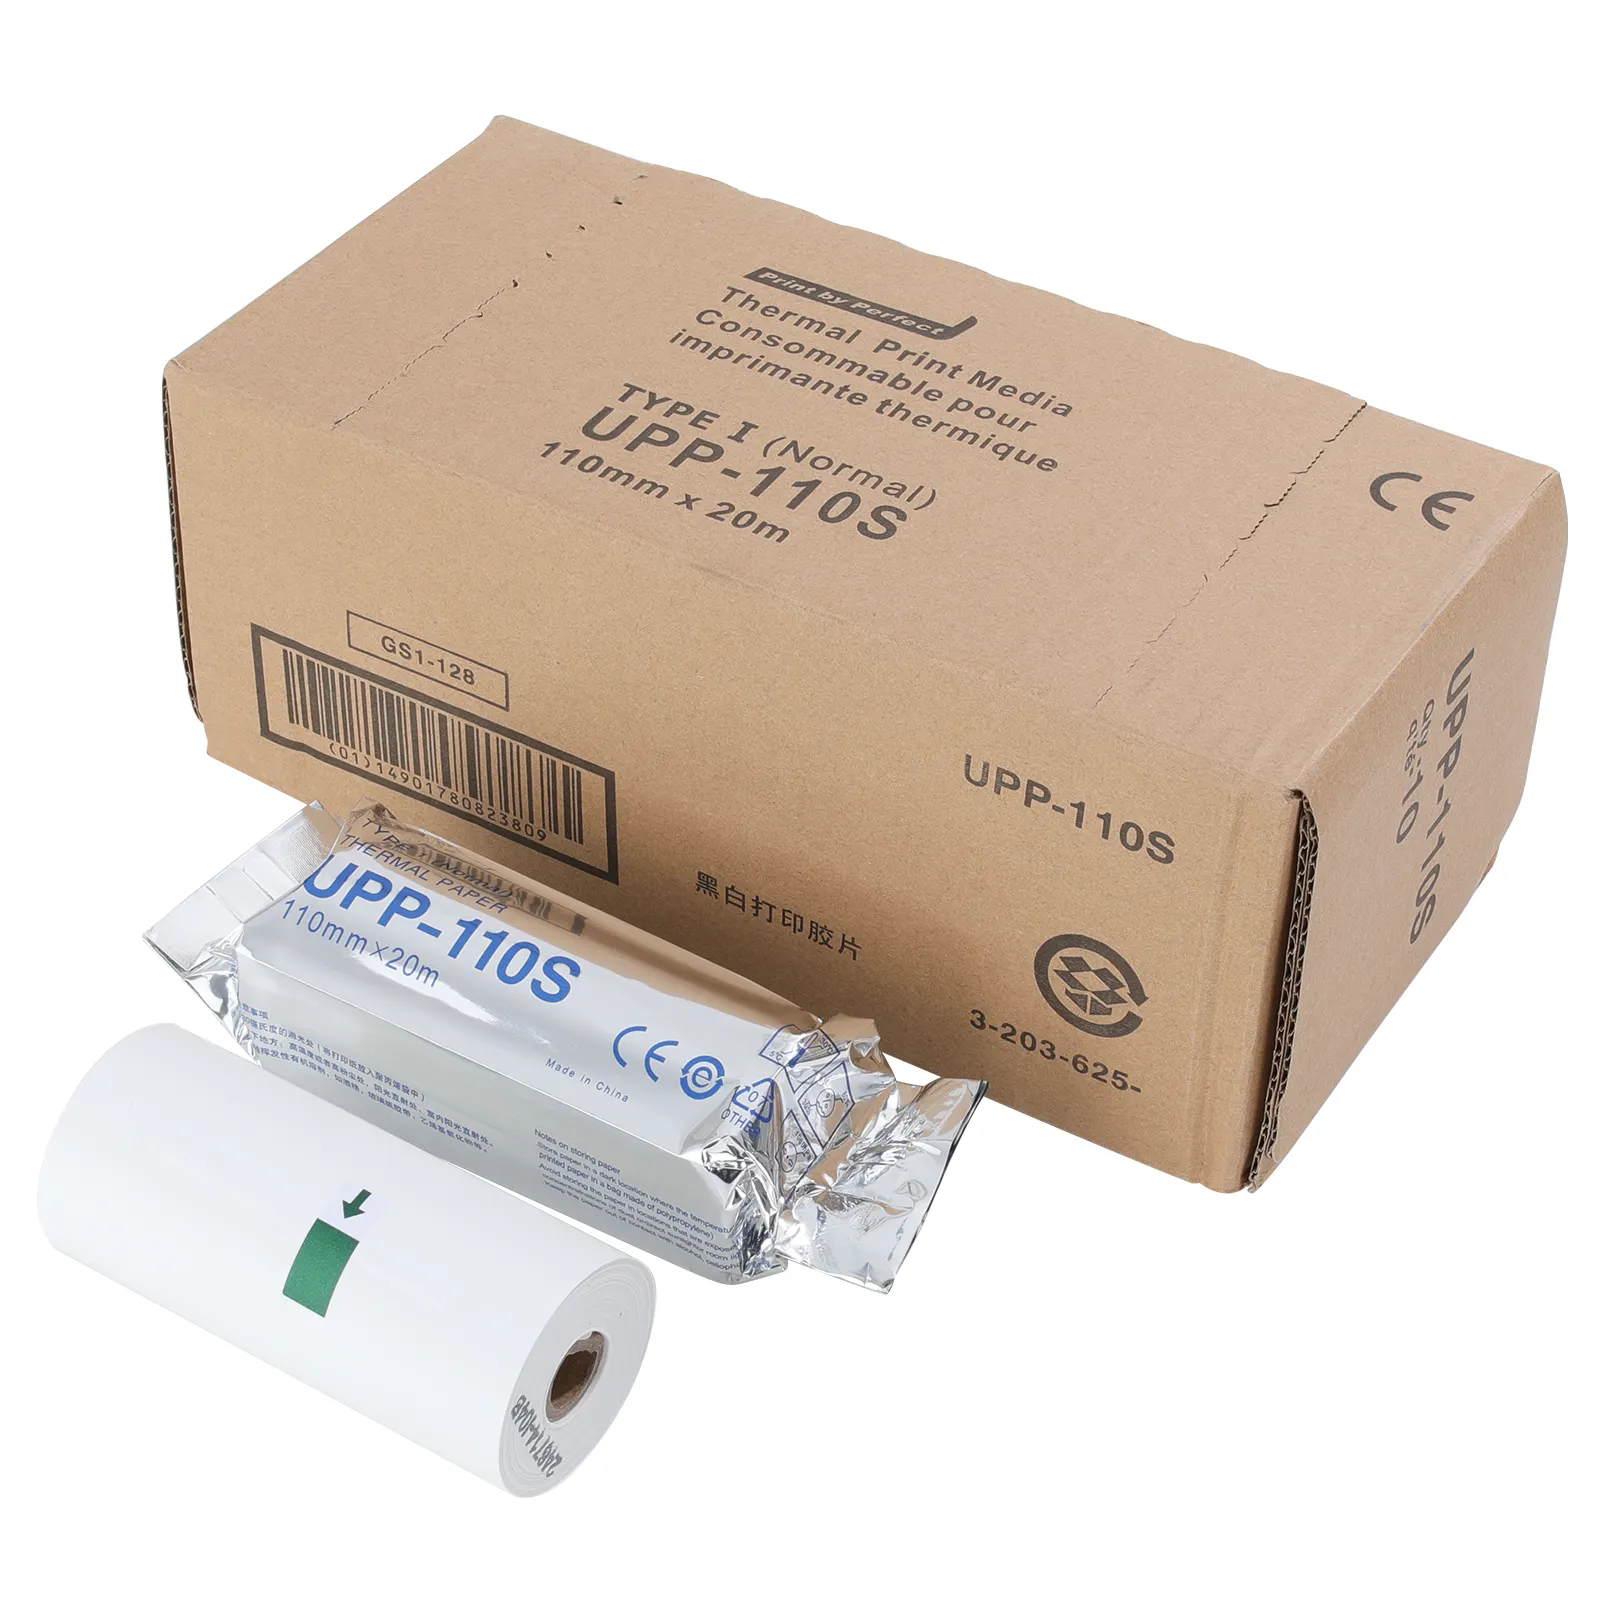 Factory Directly Supply Ultrasound Thermal Paper Roll Ultrasound Printer Paper UPP110S